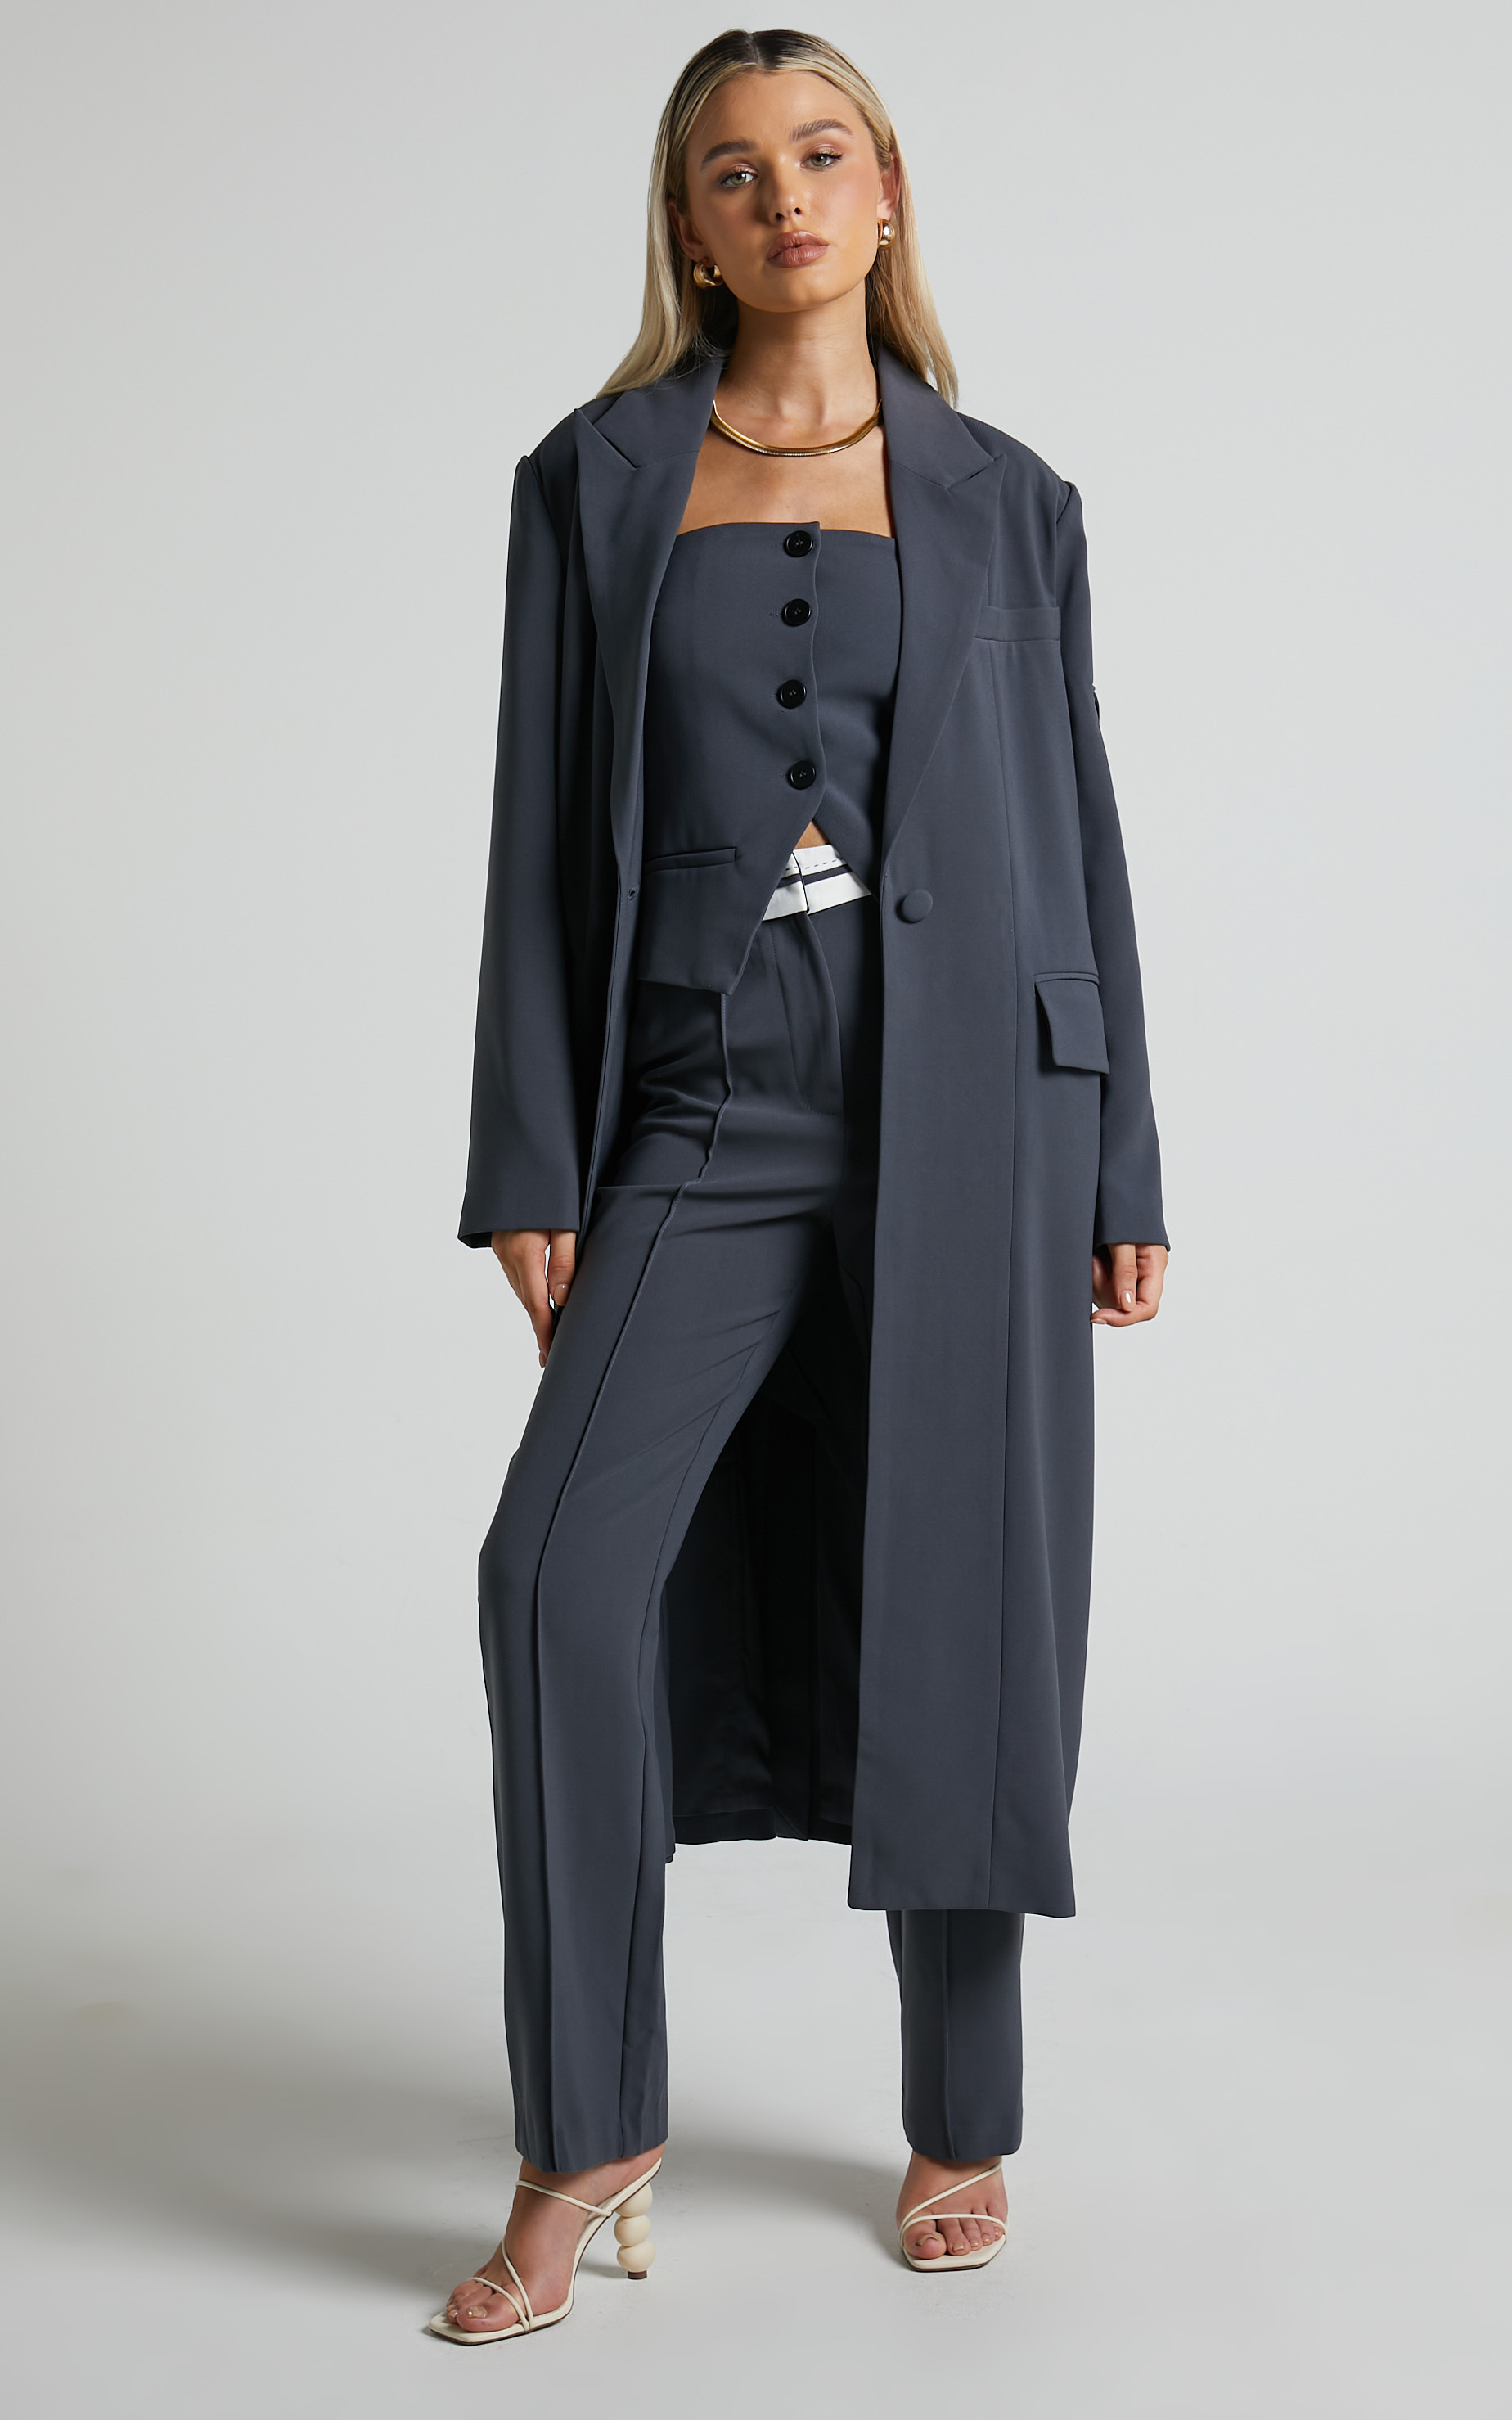 4Th & Reckless - KENNEDY COAT in Dark Grey - 06, GRY1, hi-res image number null